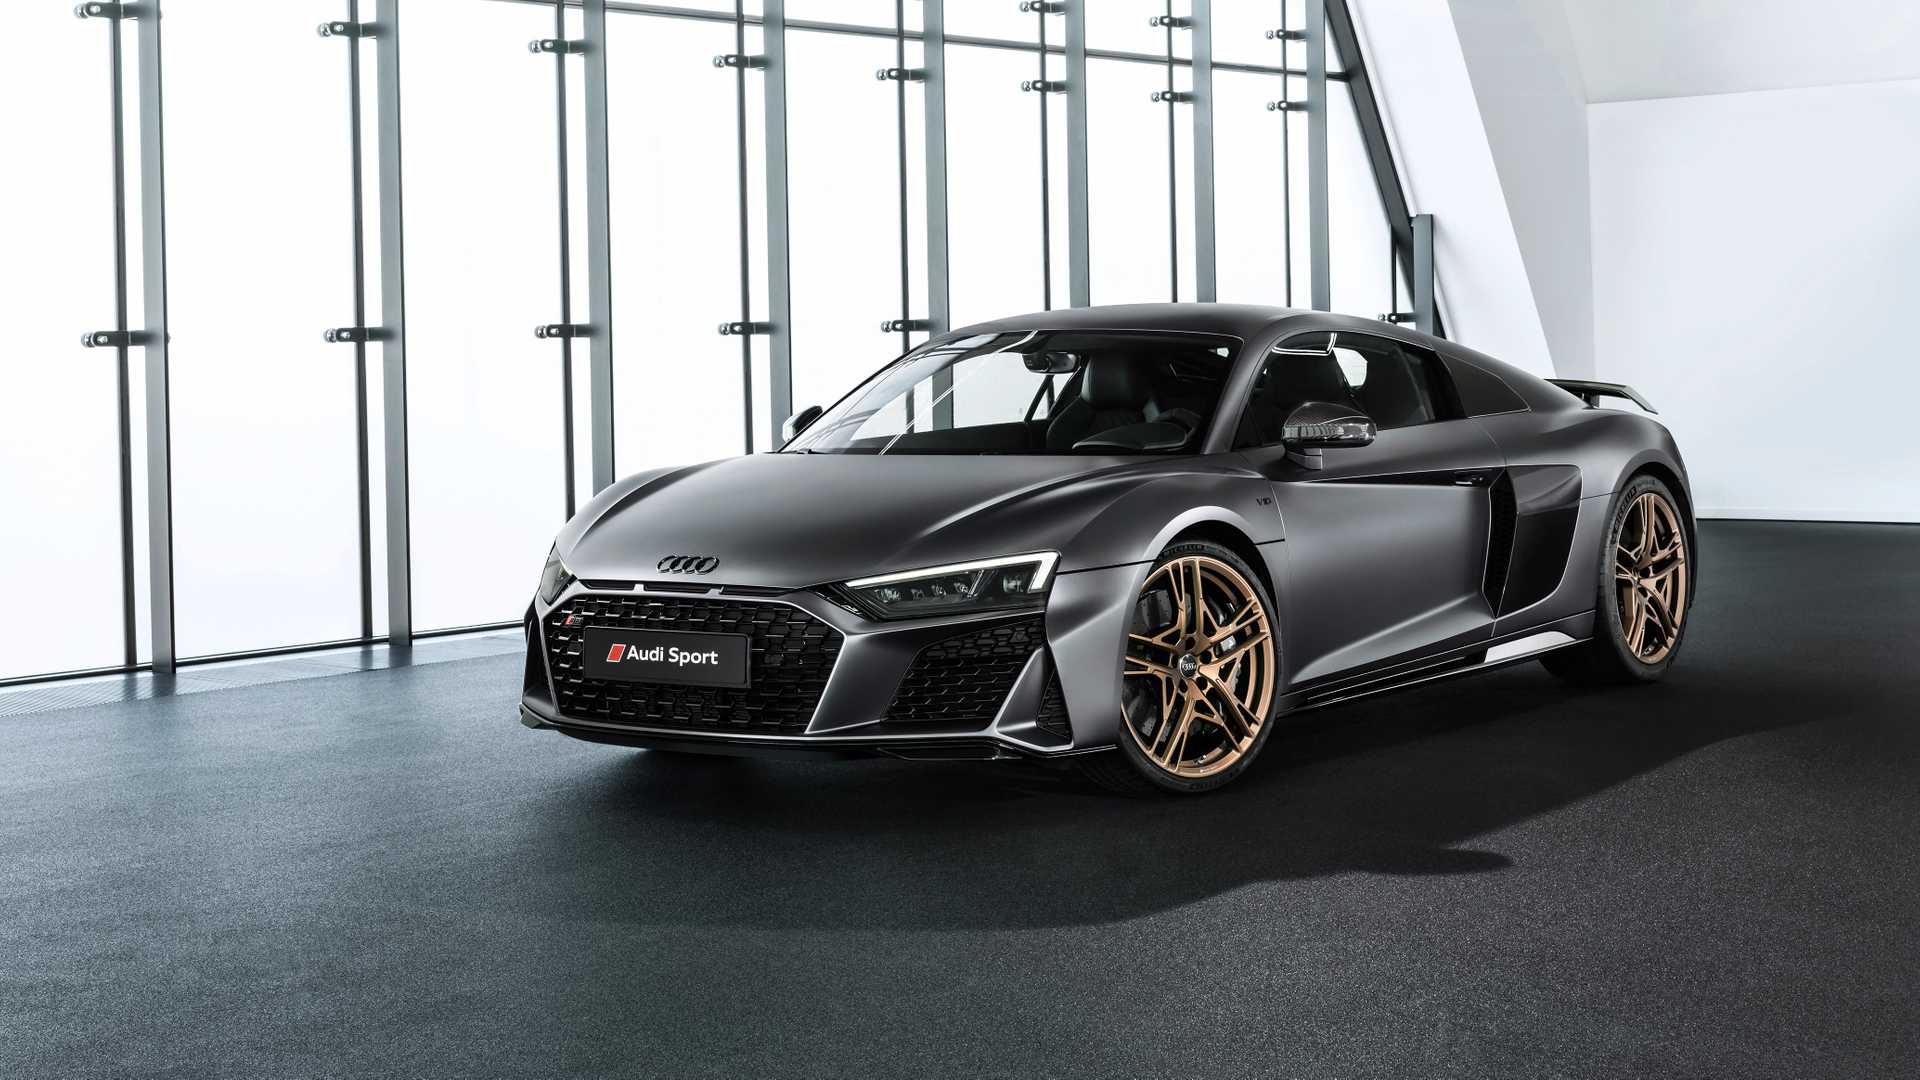 2020 Audi R8 V10 Decenium Special Edition will cost more than Audi R8